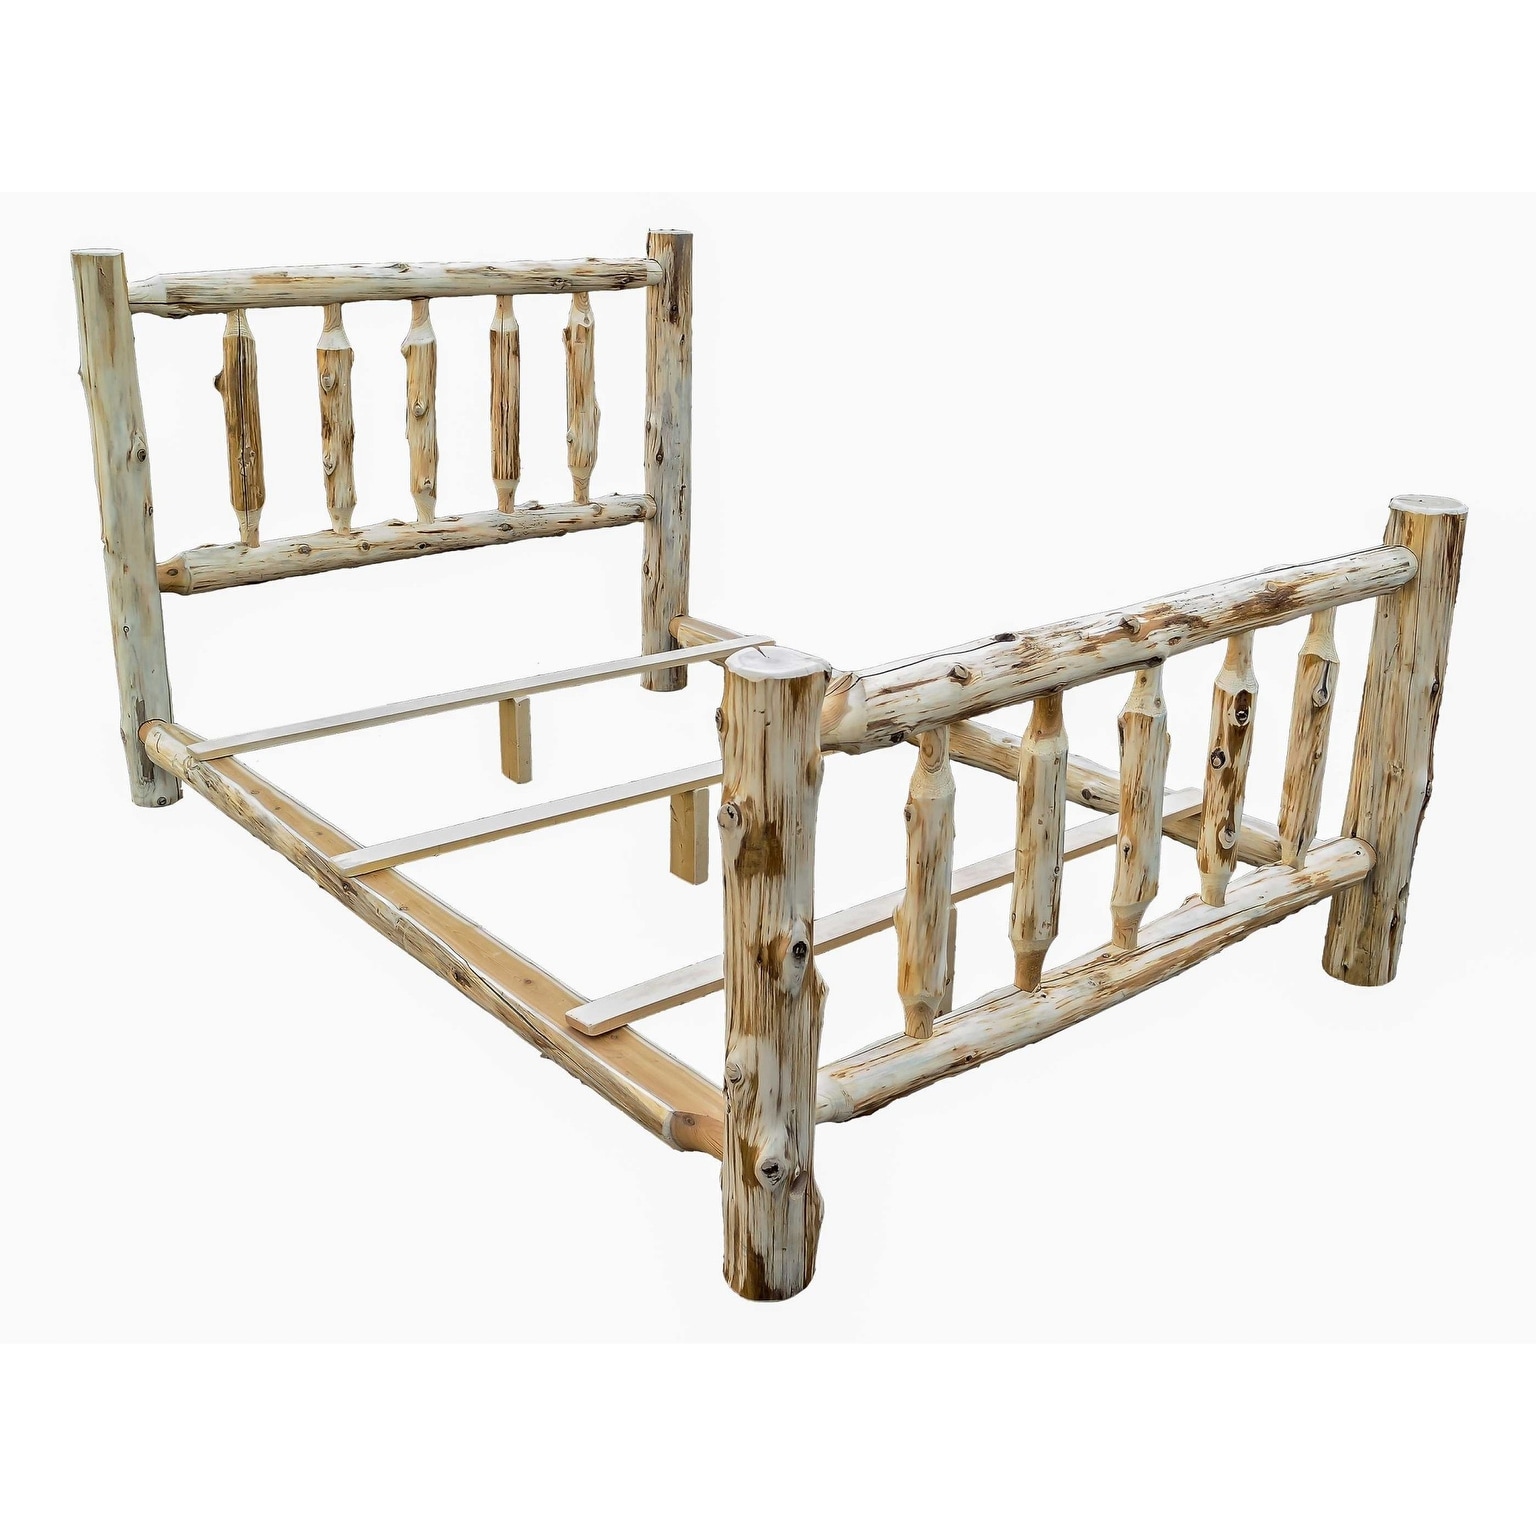 Rustic And Natural Cedar Xl Single Traditional Log Bed Overstock 32659712